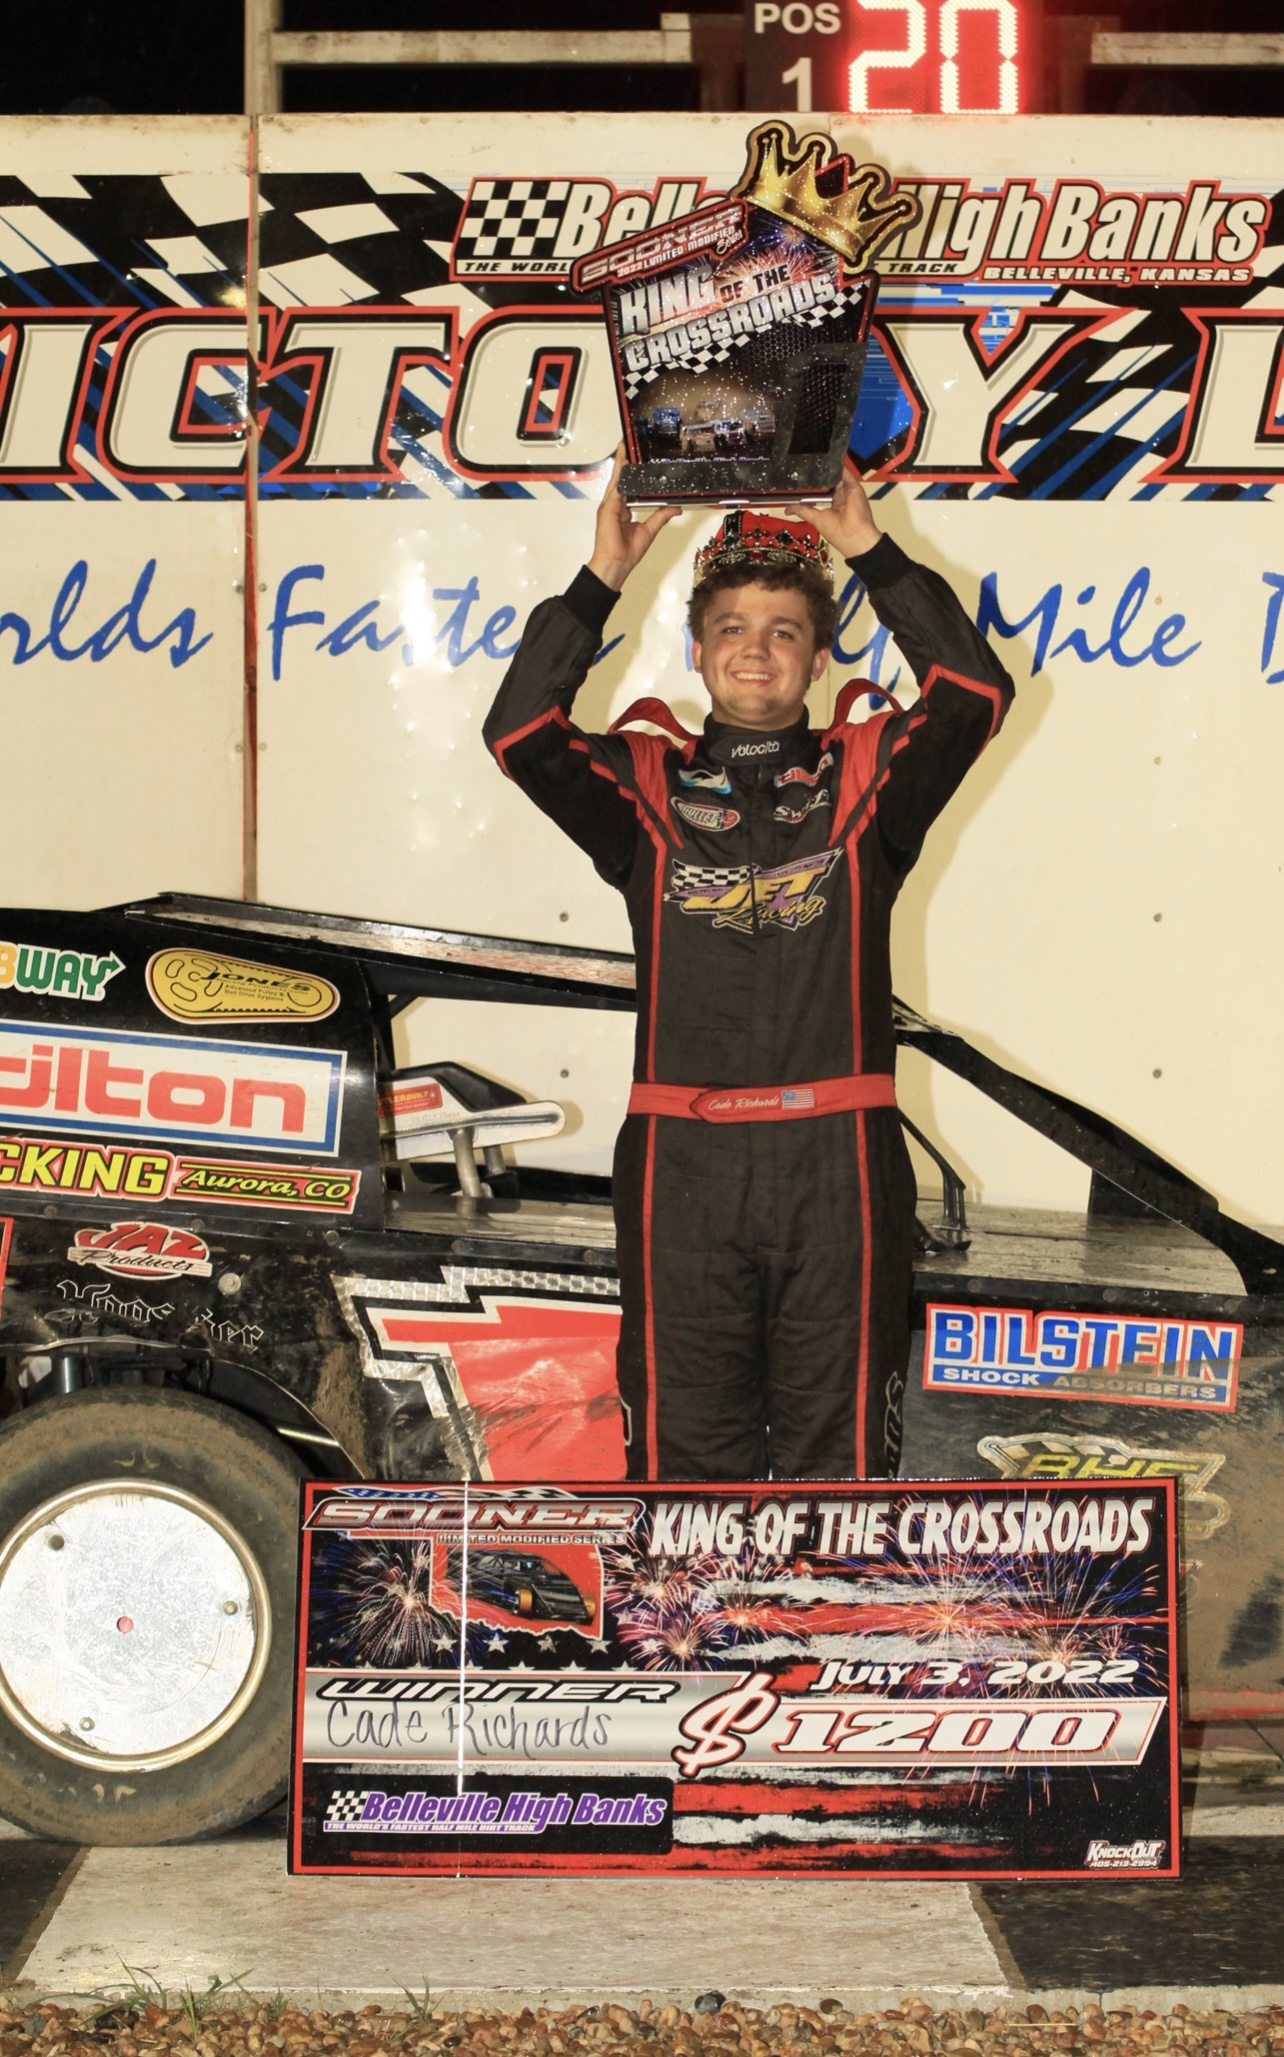 Cade wins at Belleville high banks and is crowned King of the Crossroads!